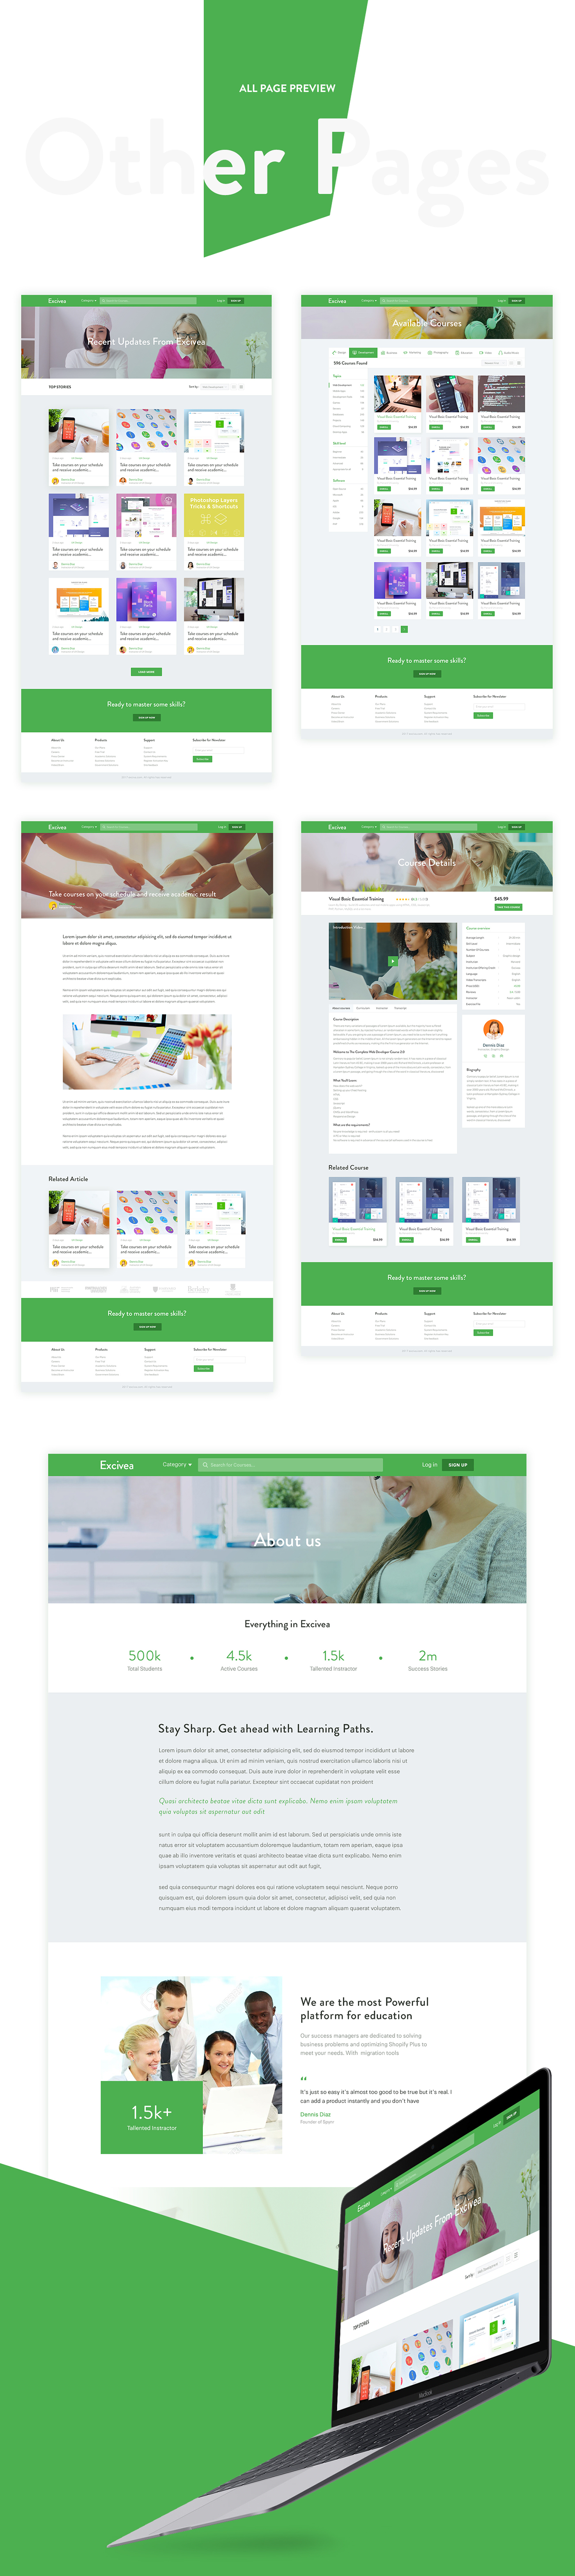 Website Design website ui user interface user experience Online education Online course meterial design e learning landing page E-learning Design learning app